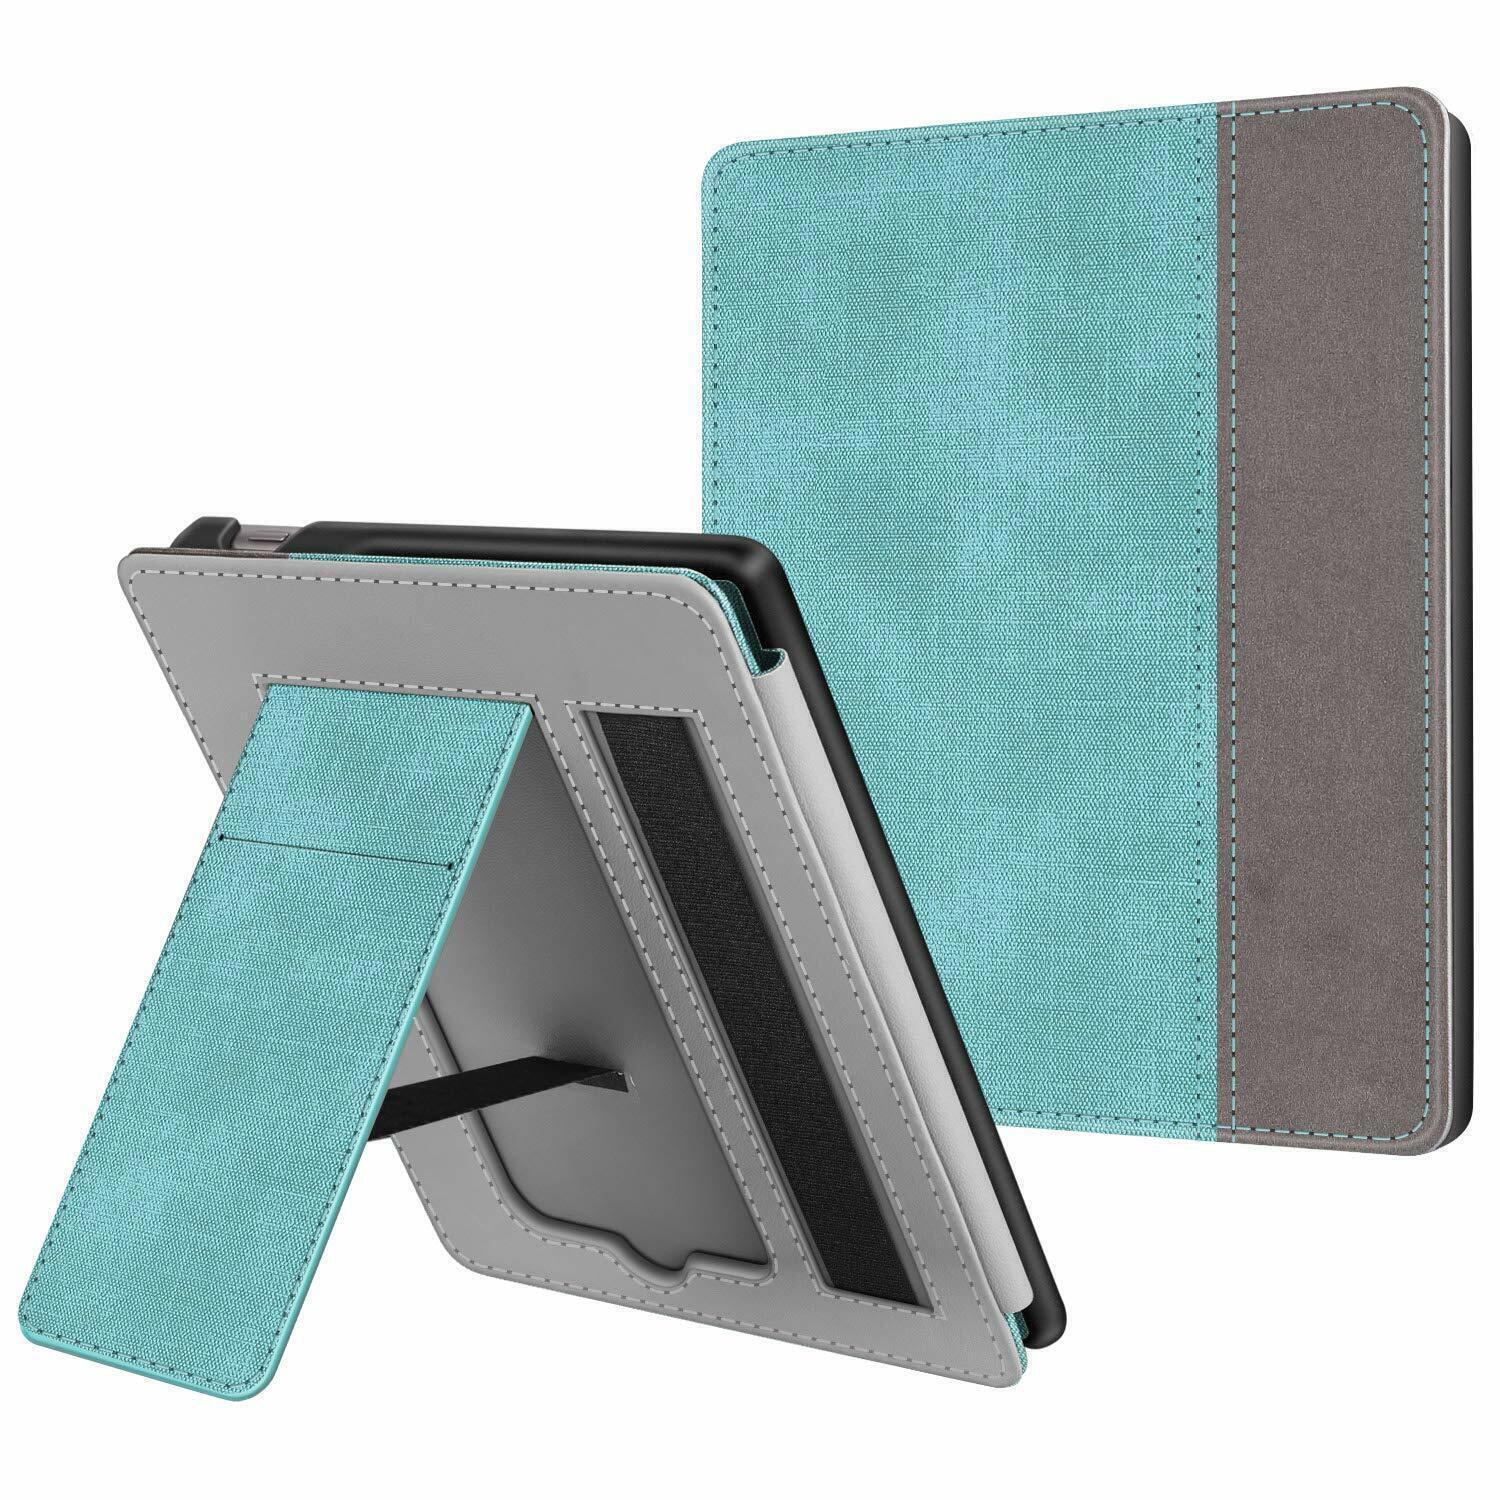 Stand Case for Kindle Oasis 10th Gen 2019/9th Gen 2017 Sleeve Cover w/Hand Strap